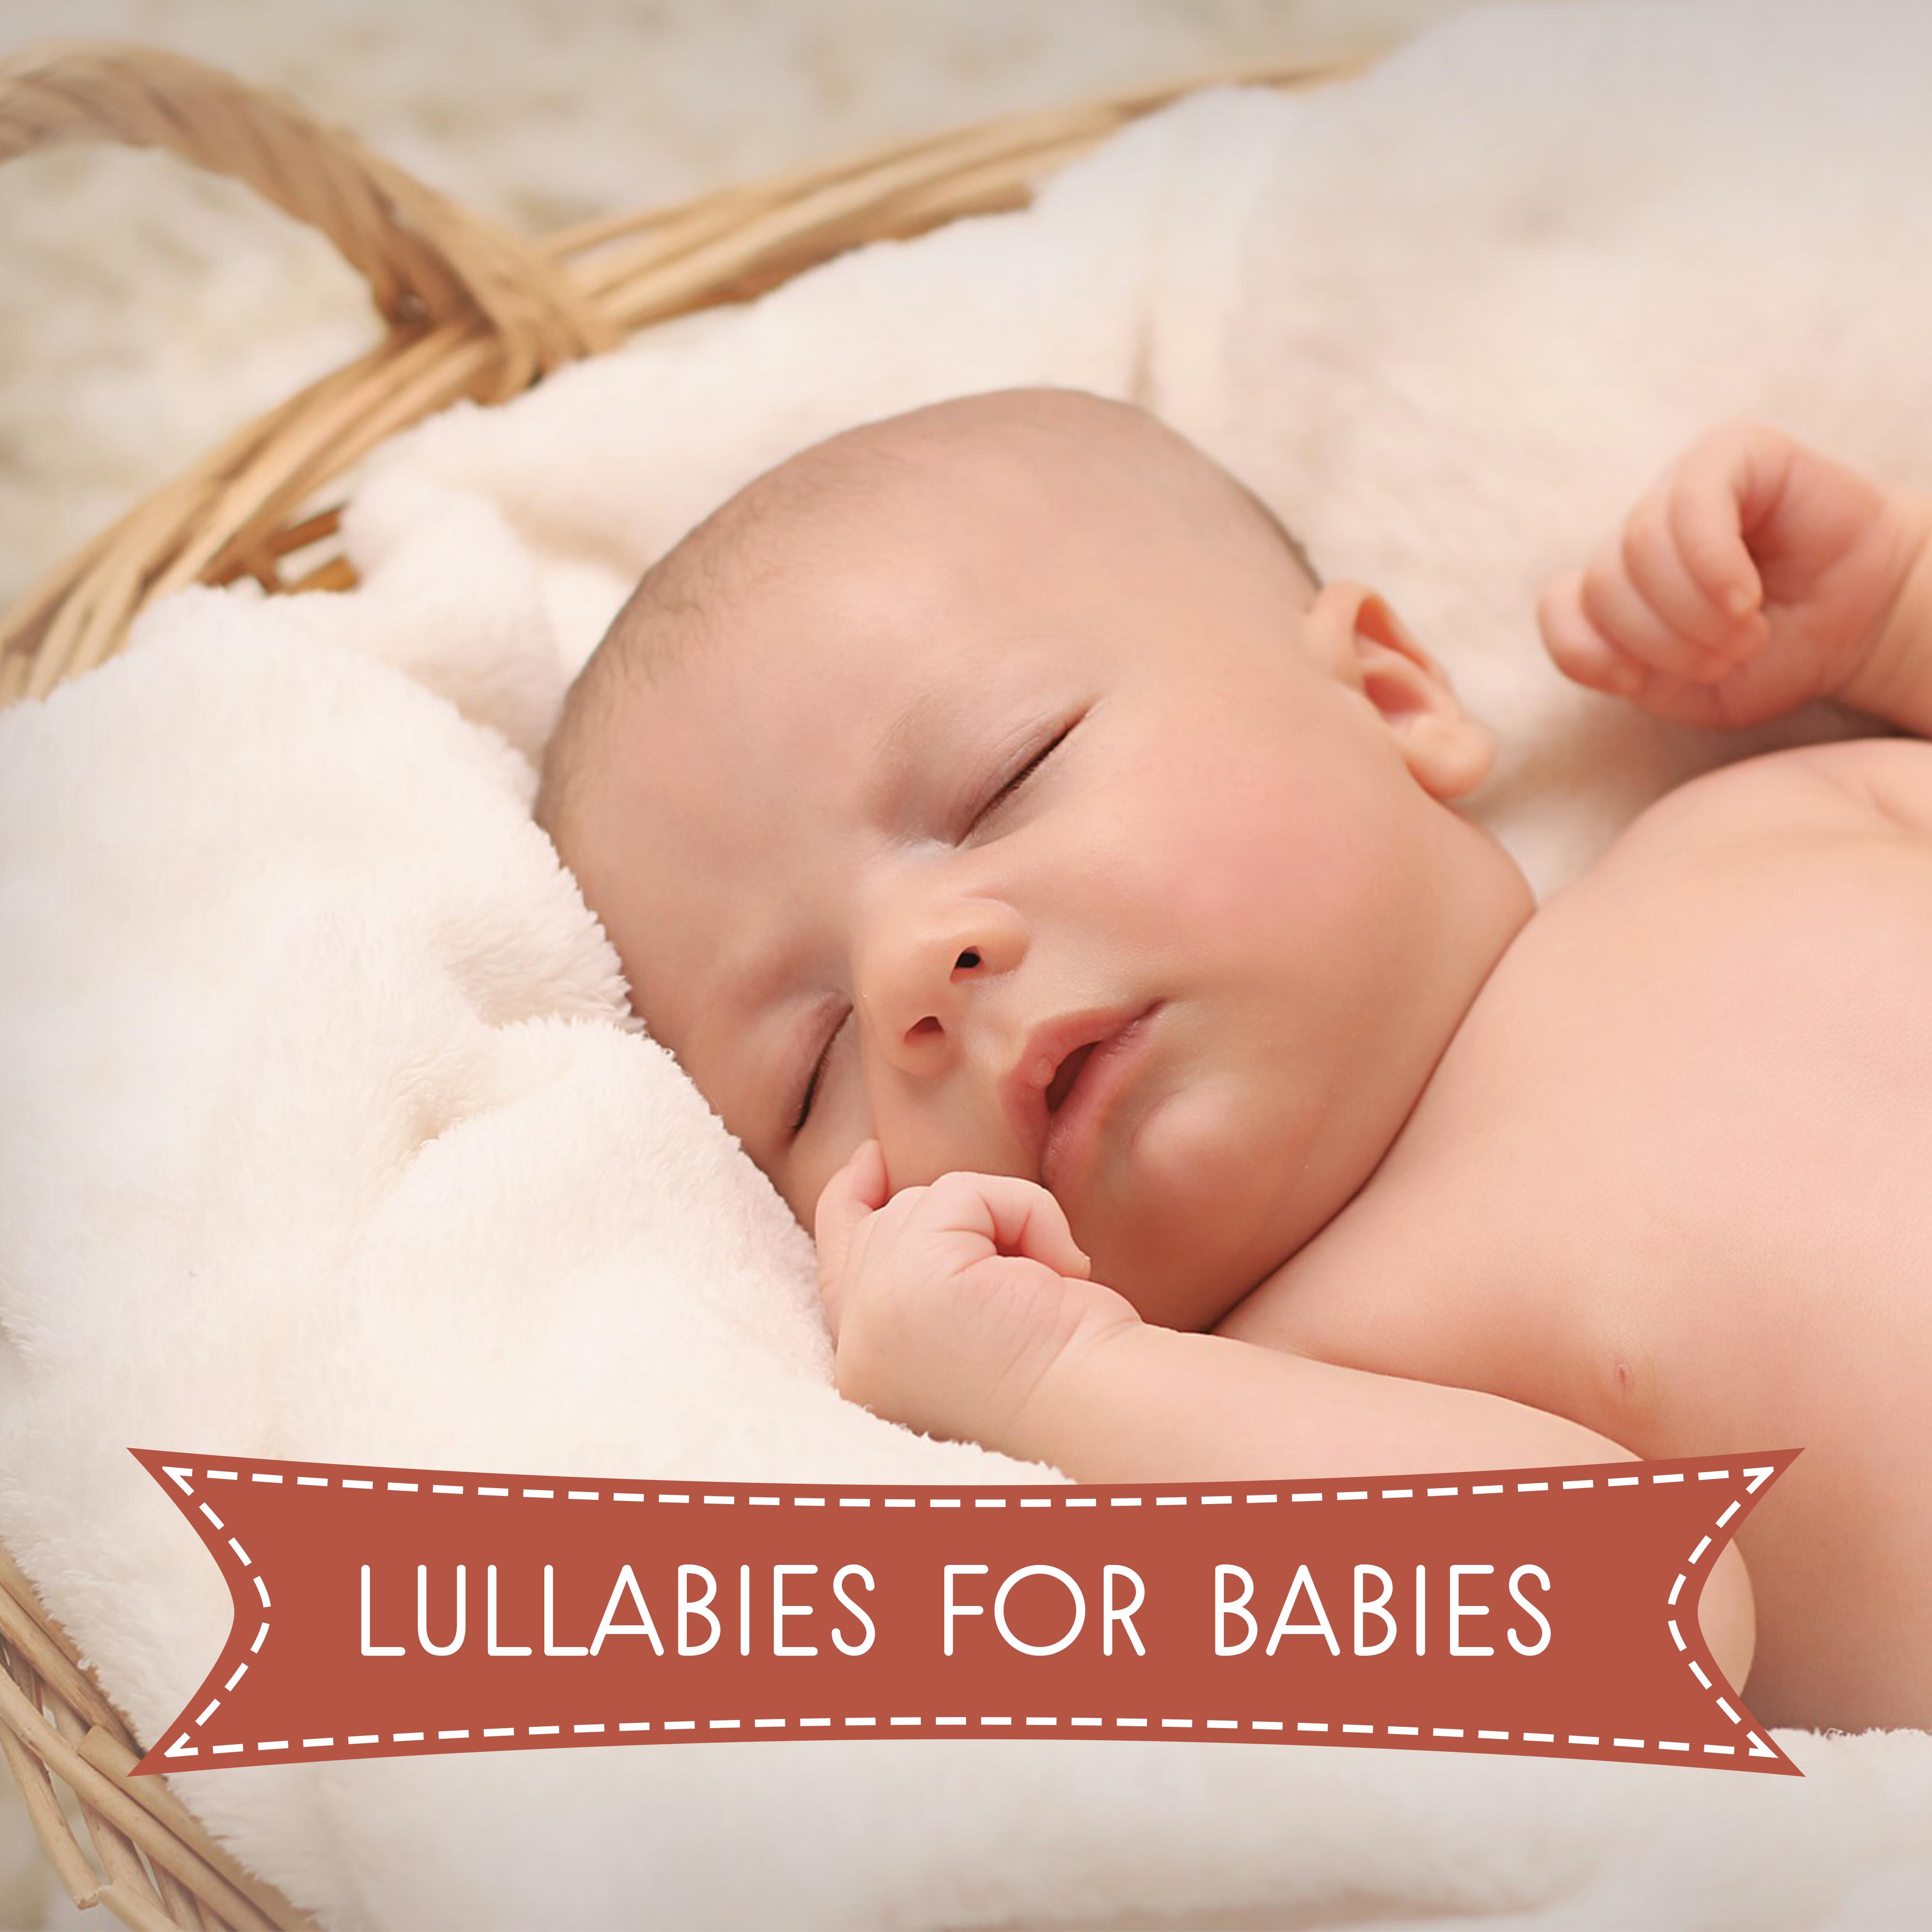 Lullabies for Babies  Soft Songs of Nature Music, New Age for Sleep, Music for Falling Asleep, Cald Down Baby and Relax